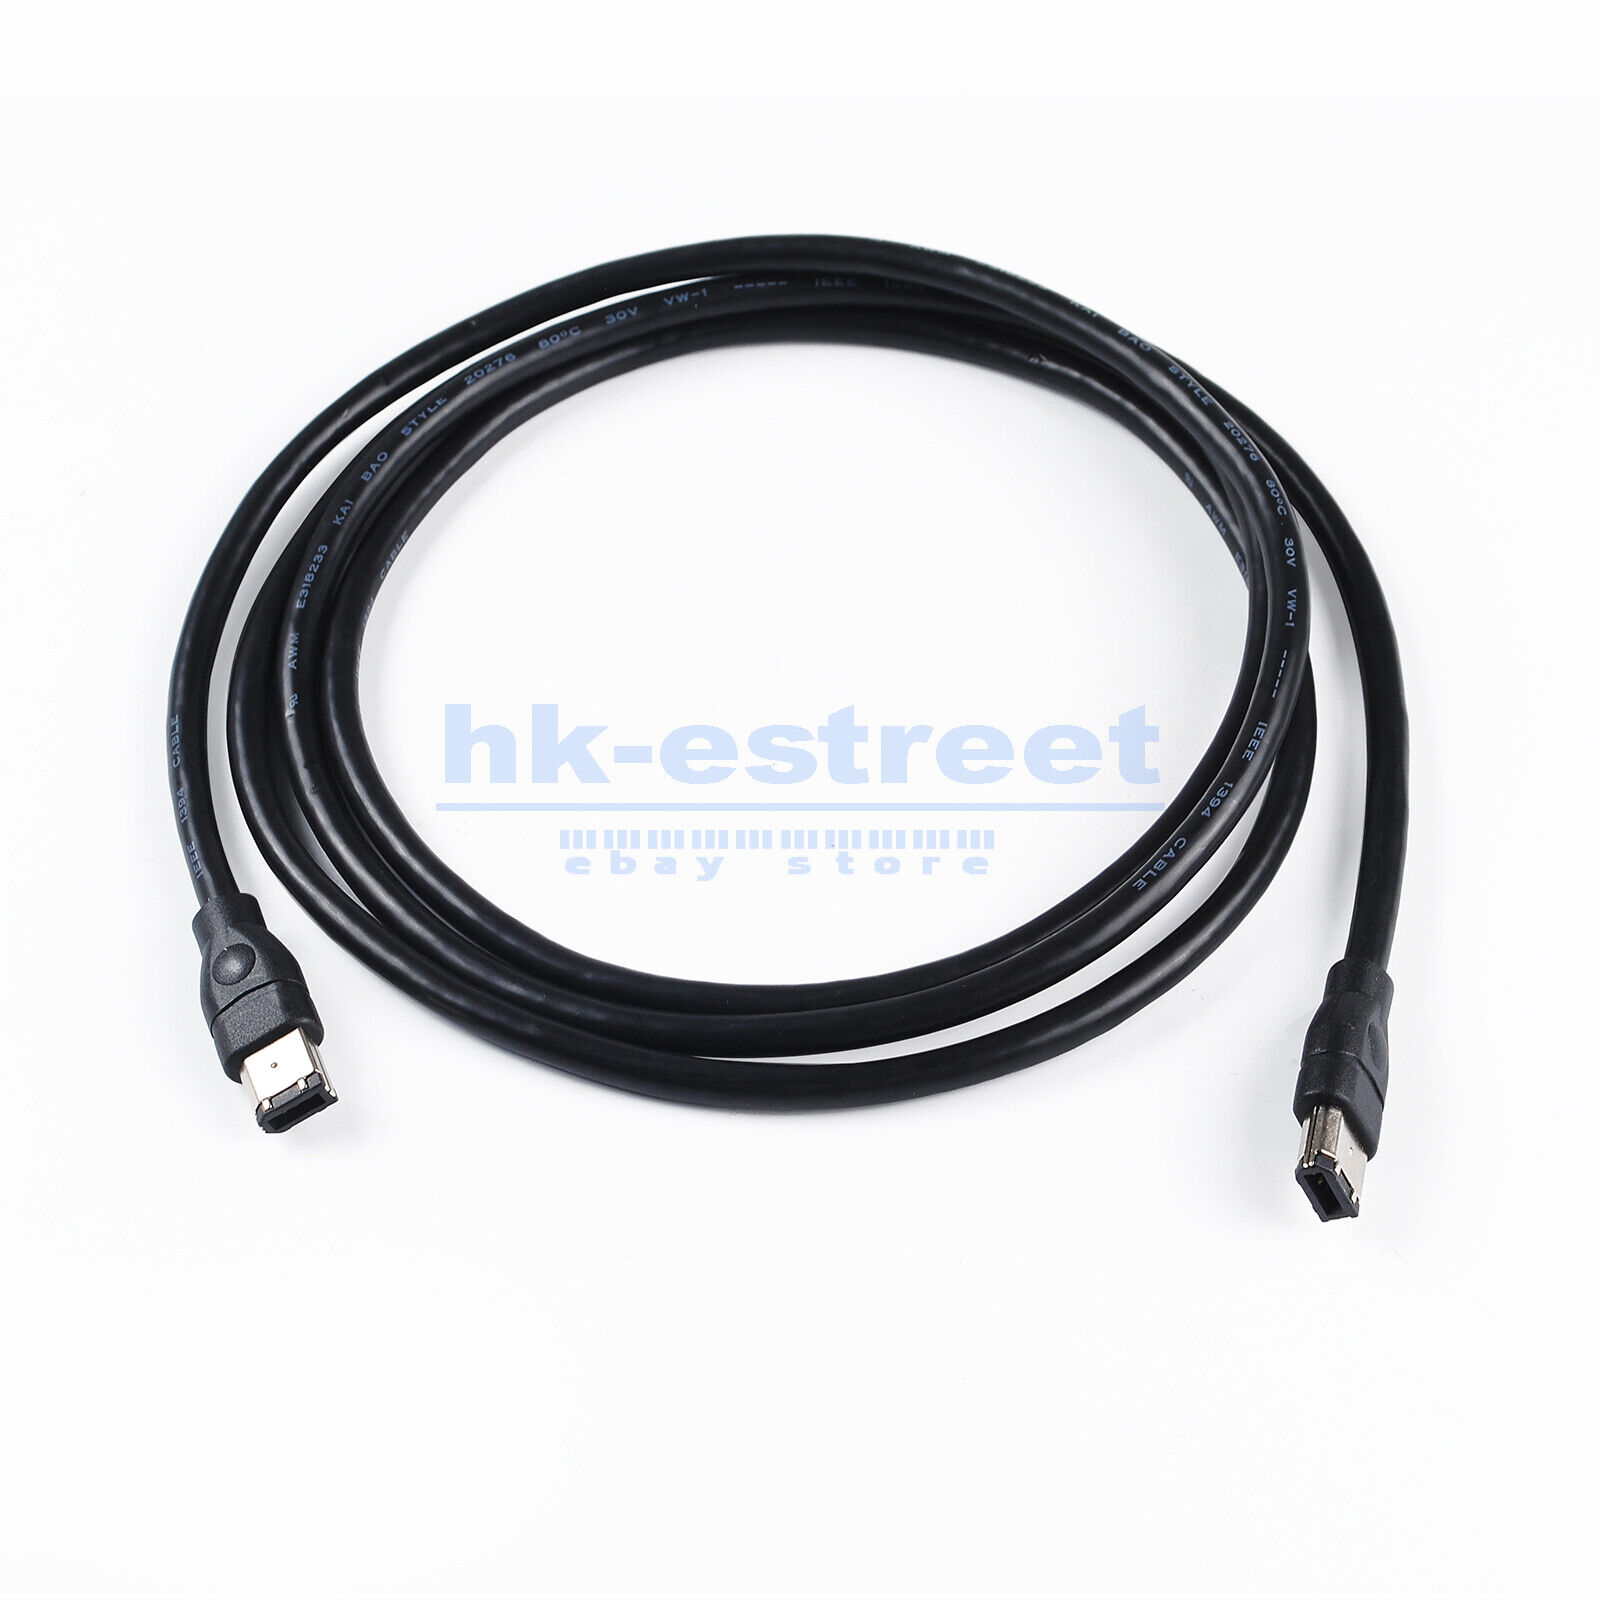 6FT FIREWIRE CABLE 6 PIN to 6 PIN IEEE1394 iLINK 6FT PC MAC DV 6P-6P 6-6 PINS